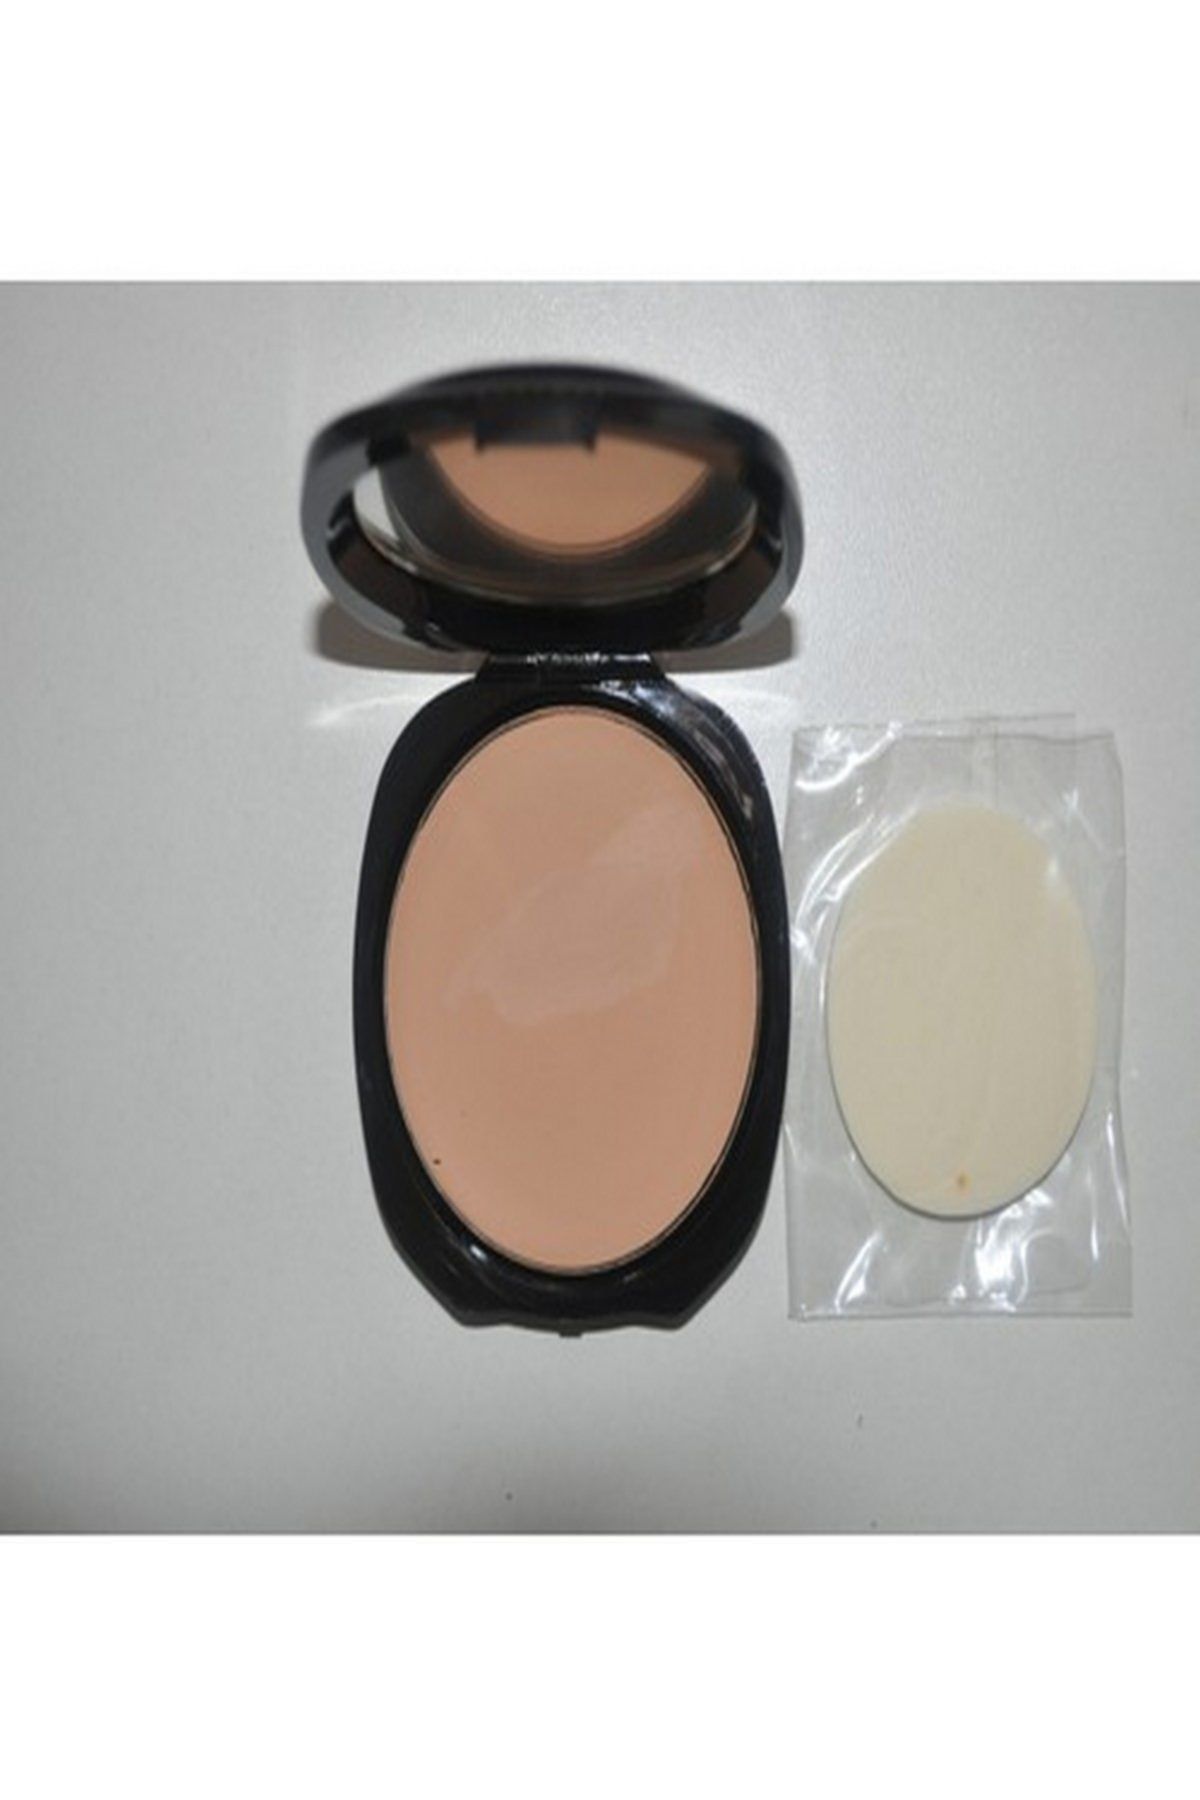 Catherine Arley Silky Touch Cream Compact 09